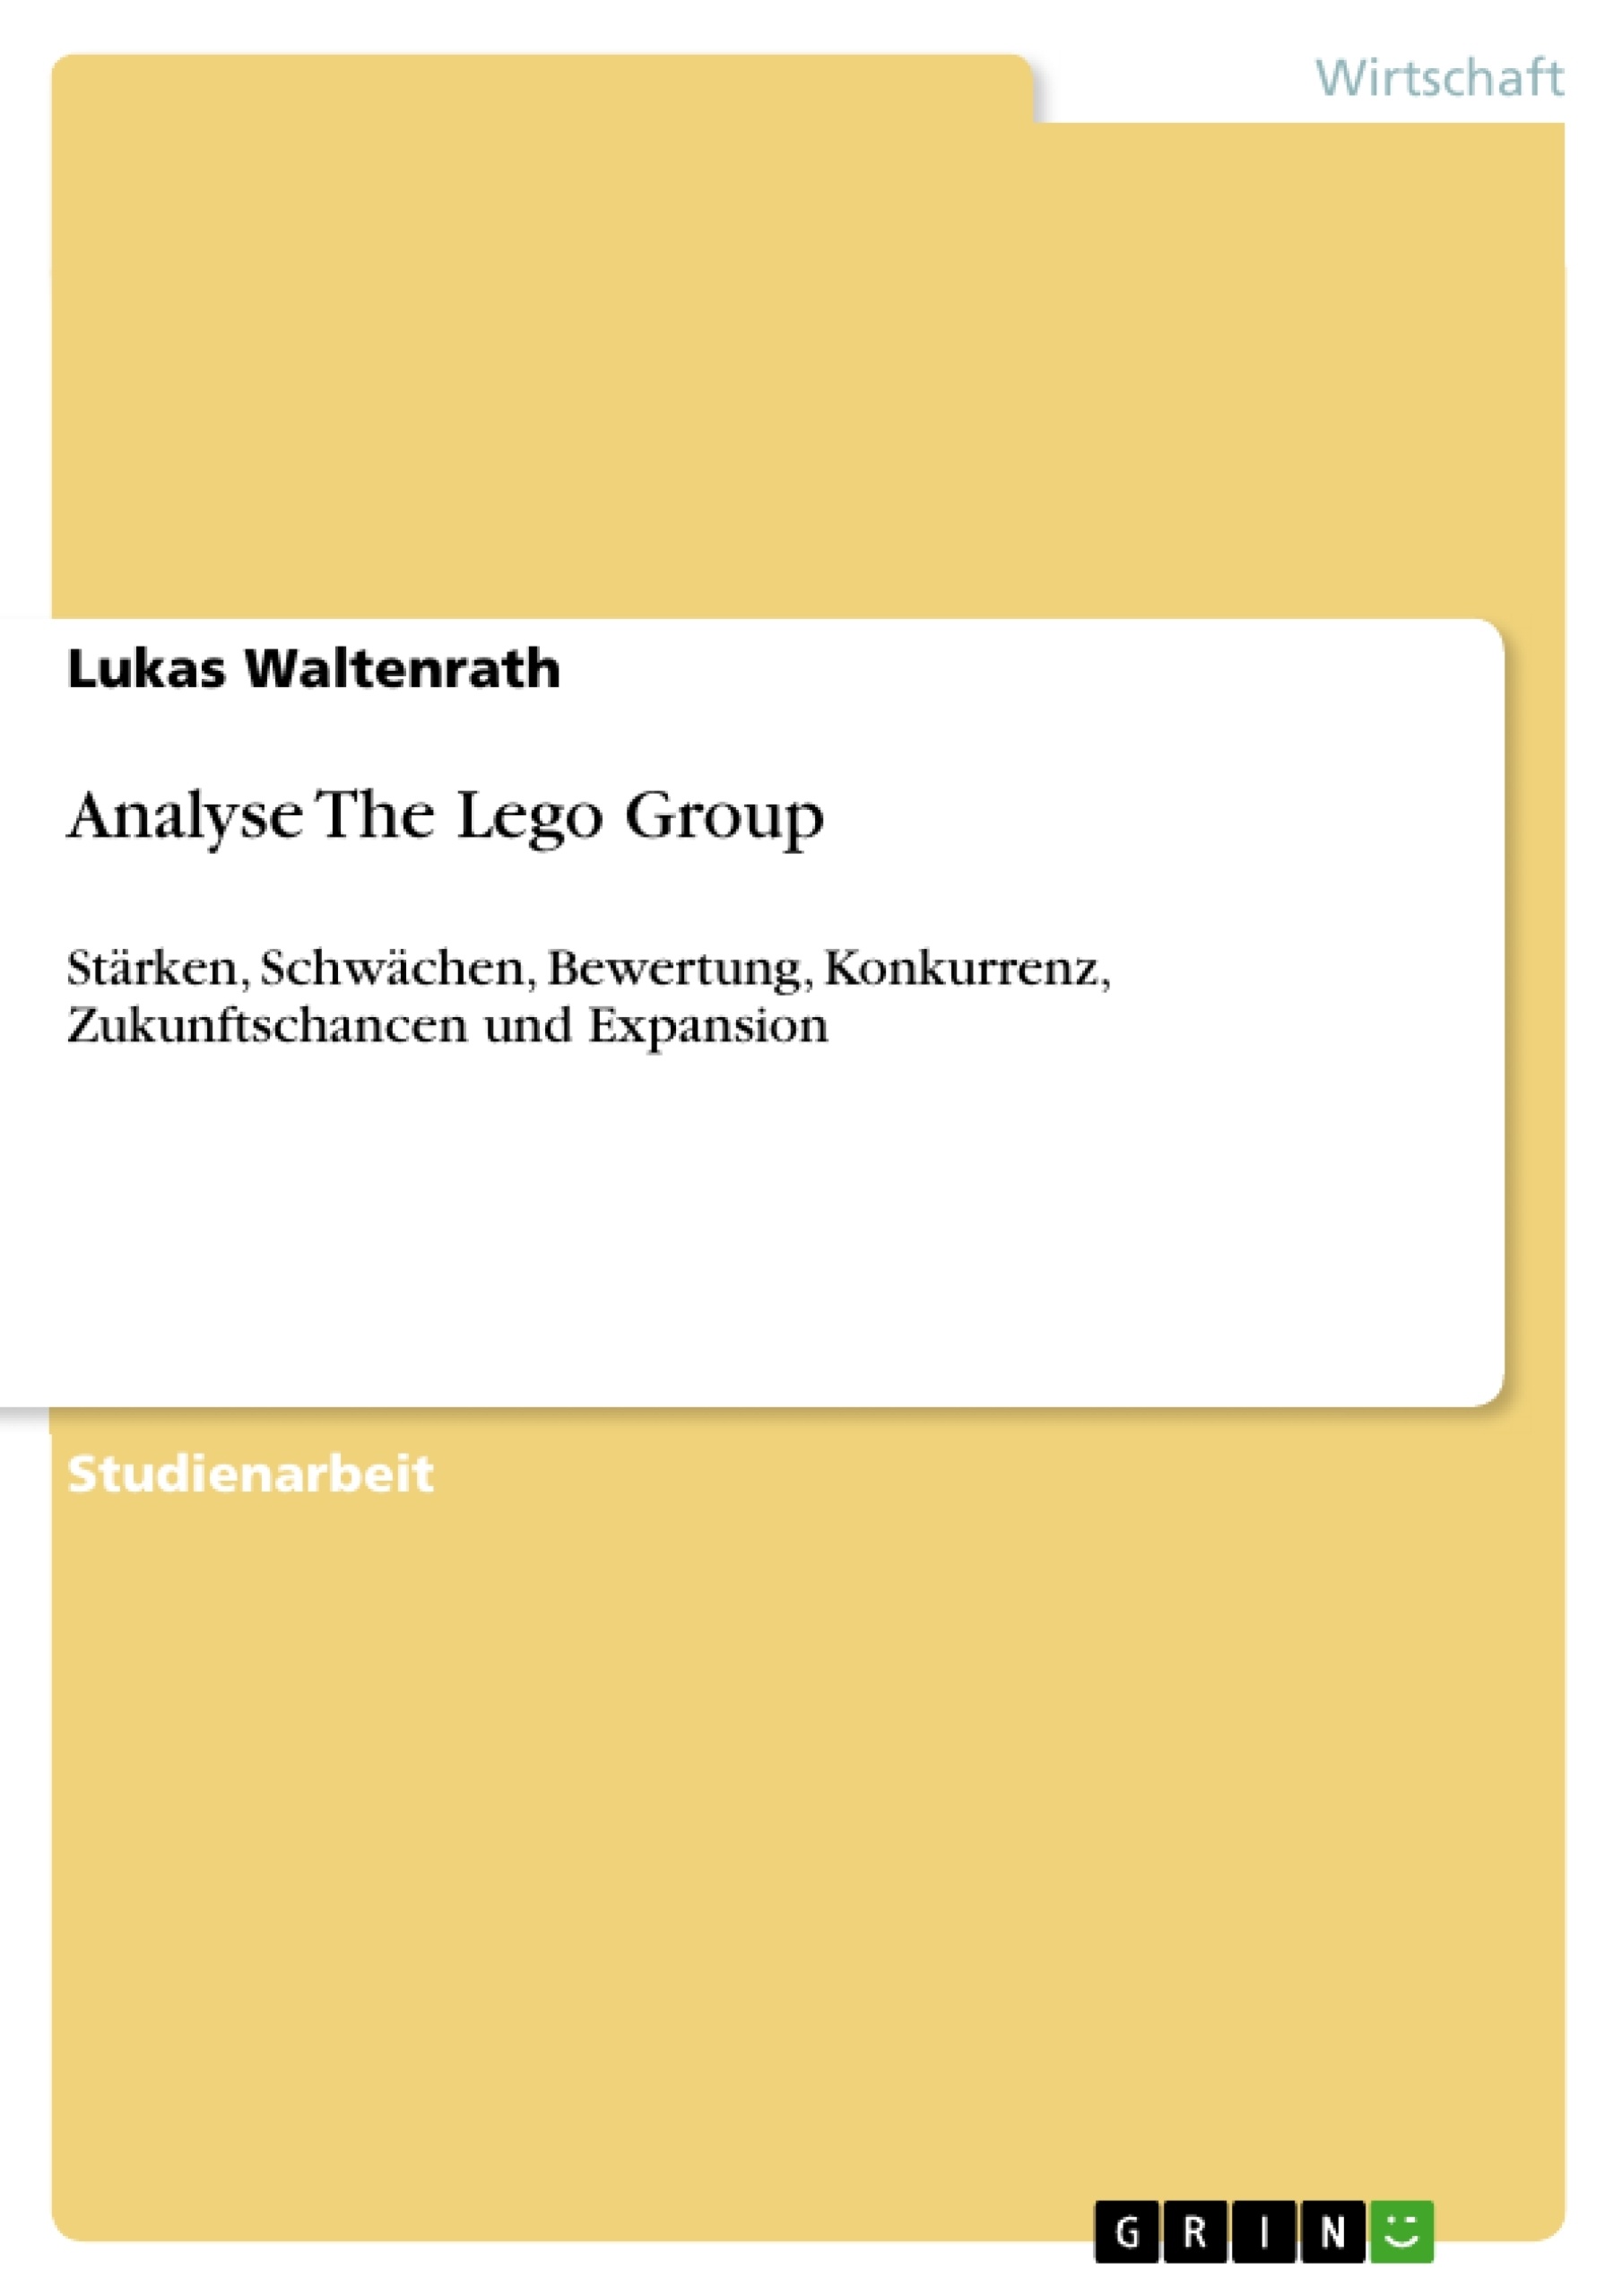 Título: Analyse The Lego Group